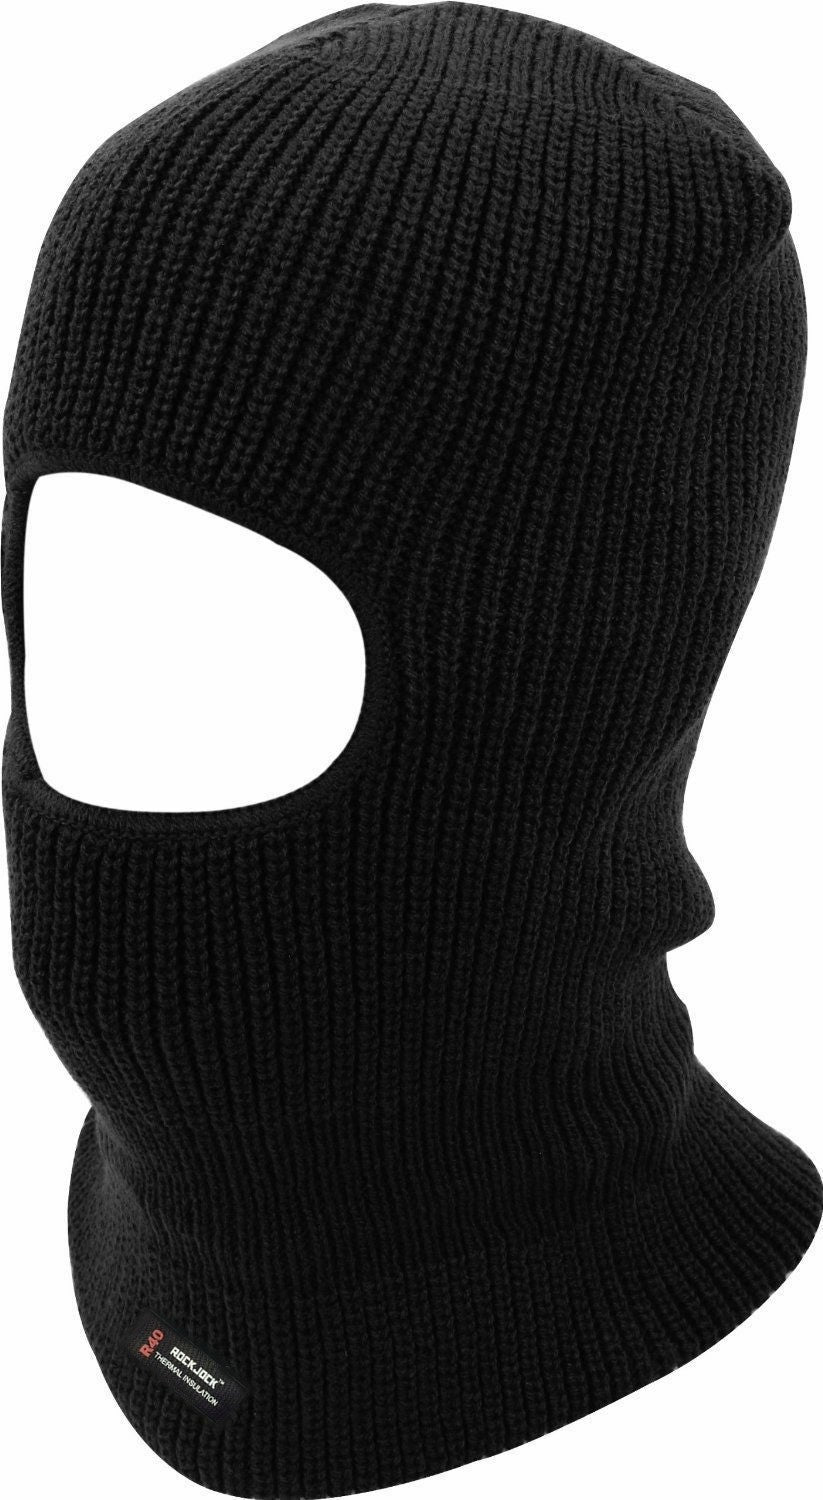 BALACLAVA BLACK THINSULATE WINTER SAS STYLE ARMY SKIING SKATE KNITTED MASK SNOOD - Hamtons Direct